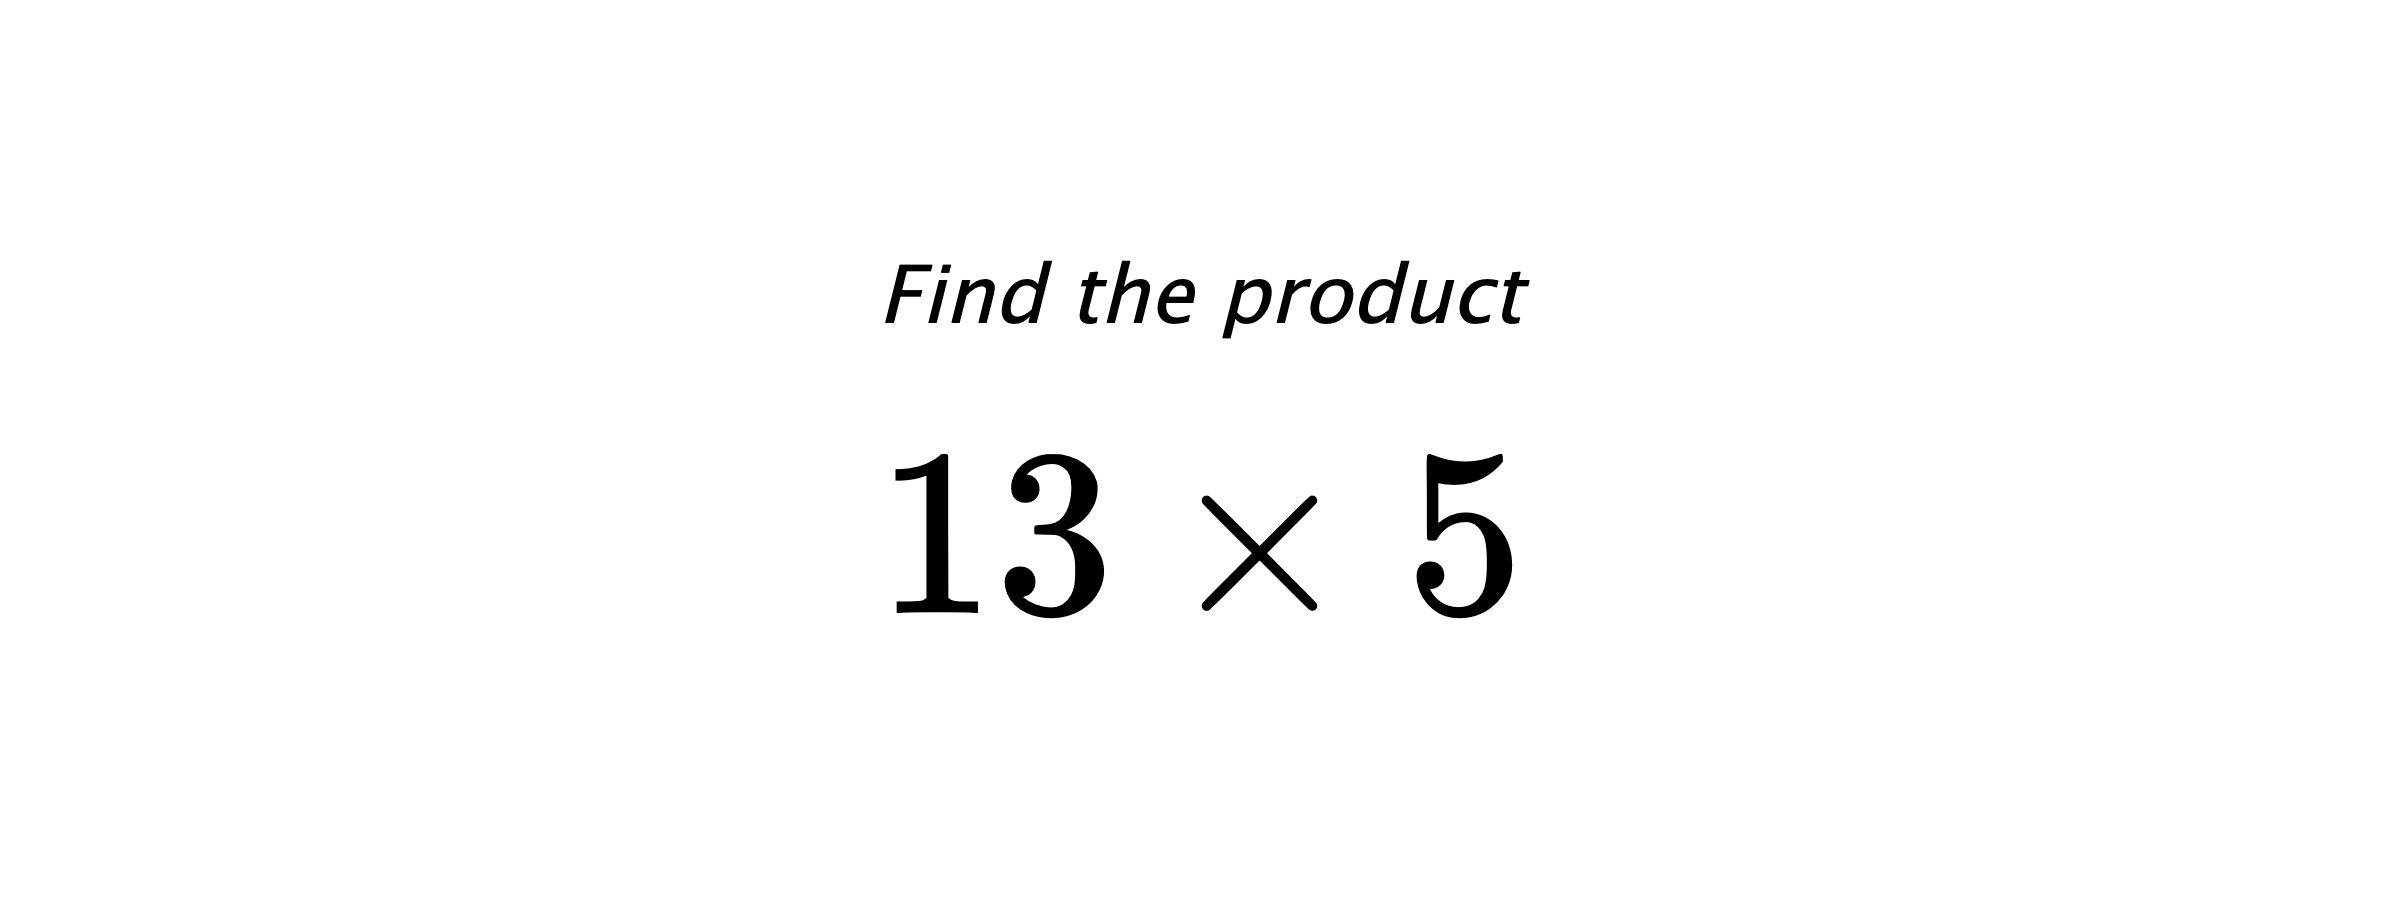 Find the product $ 13 \times 5 $